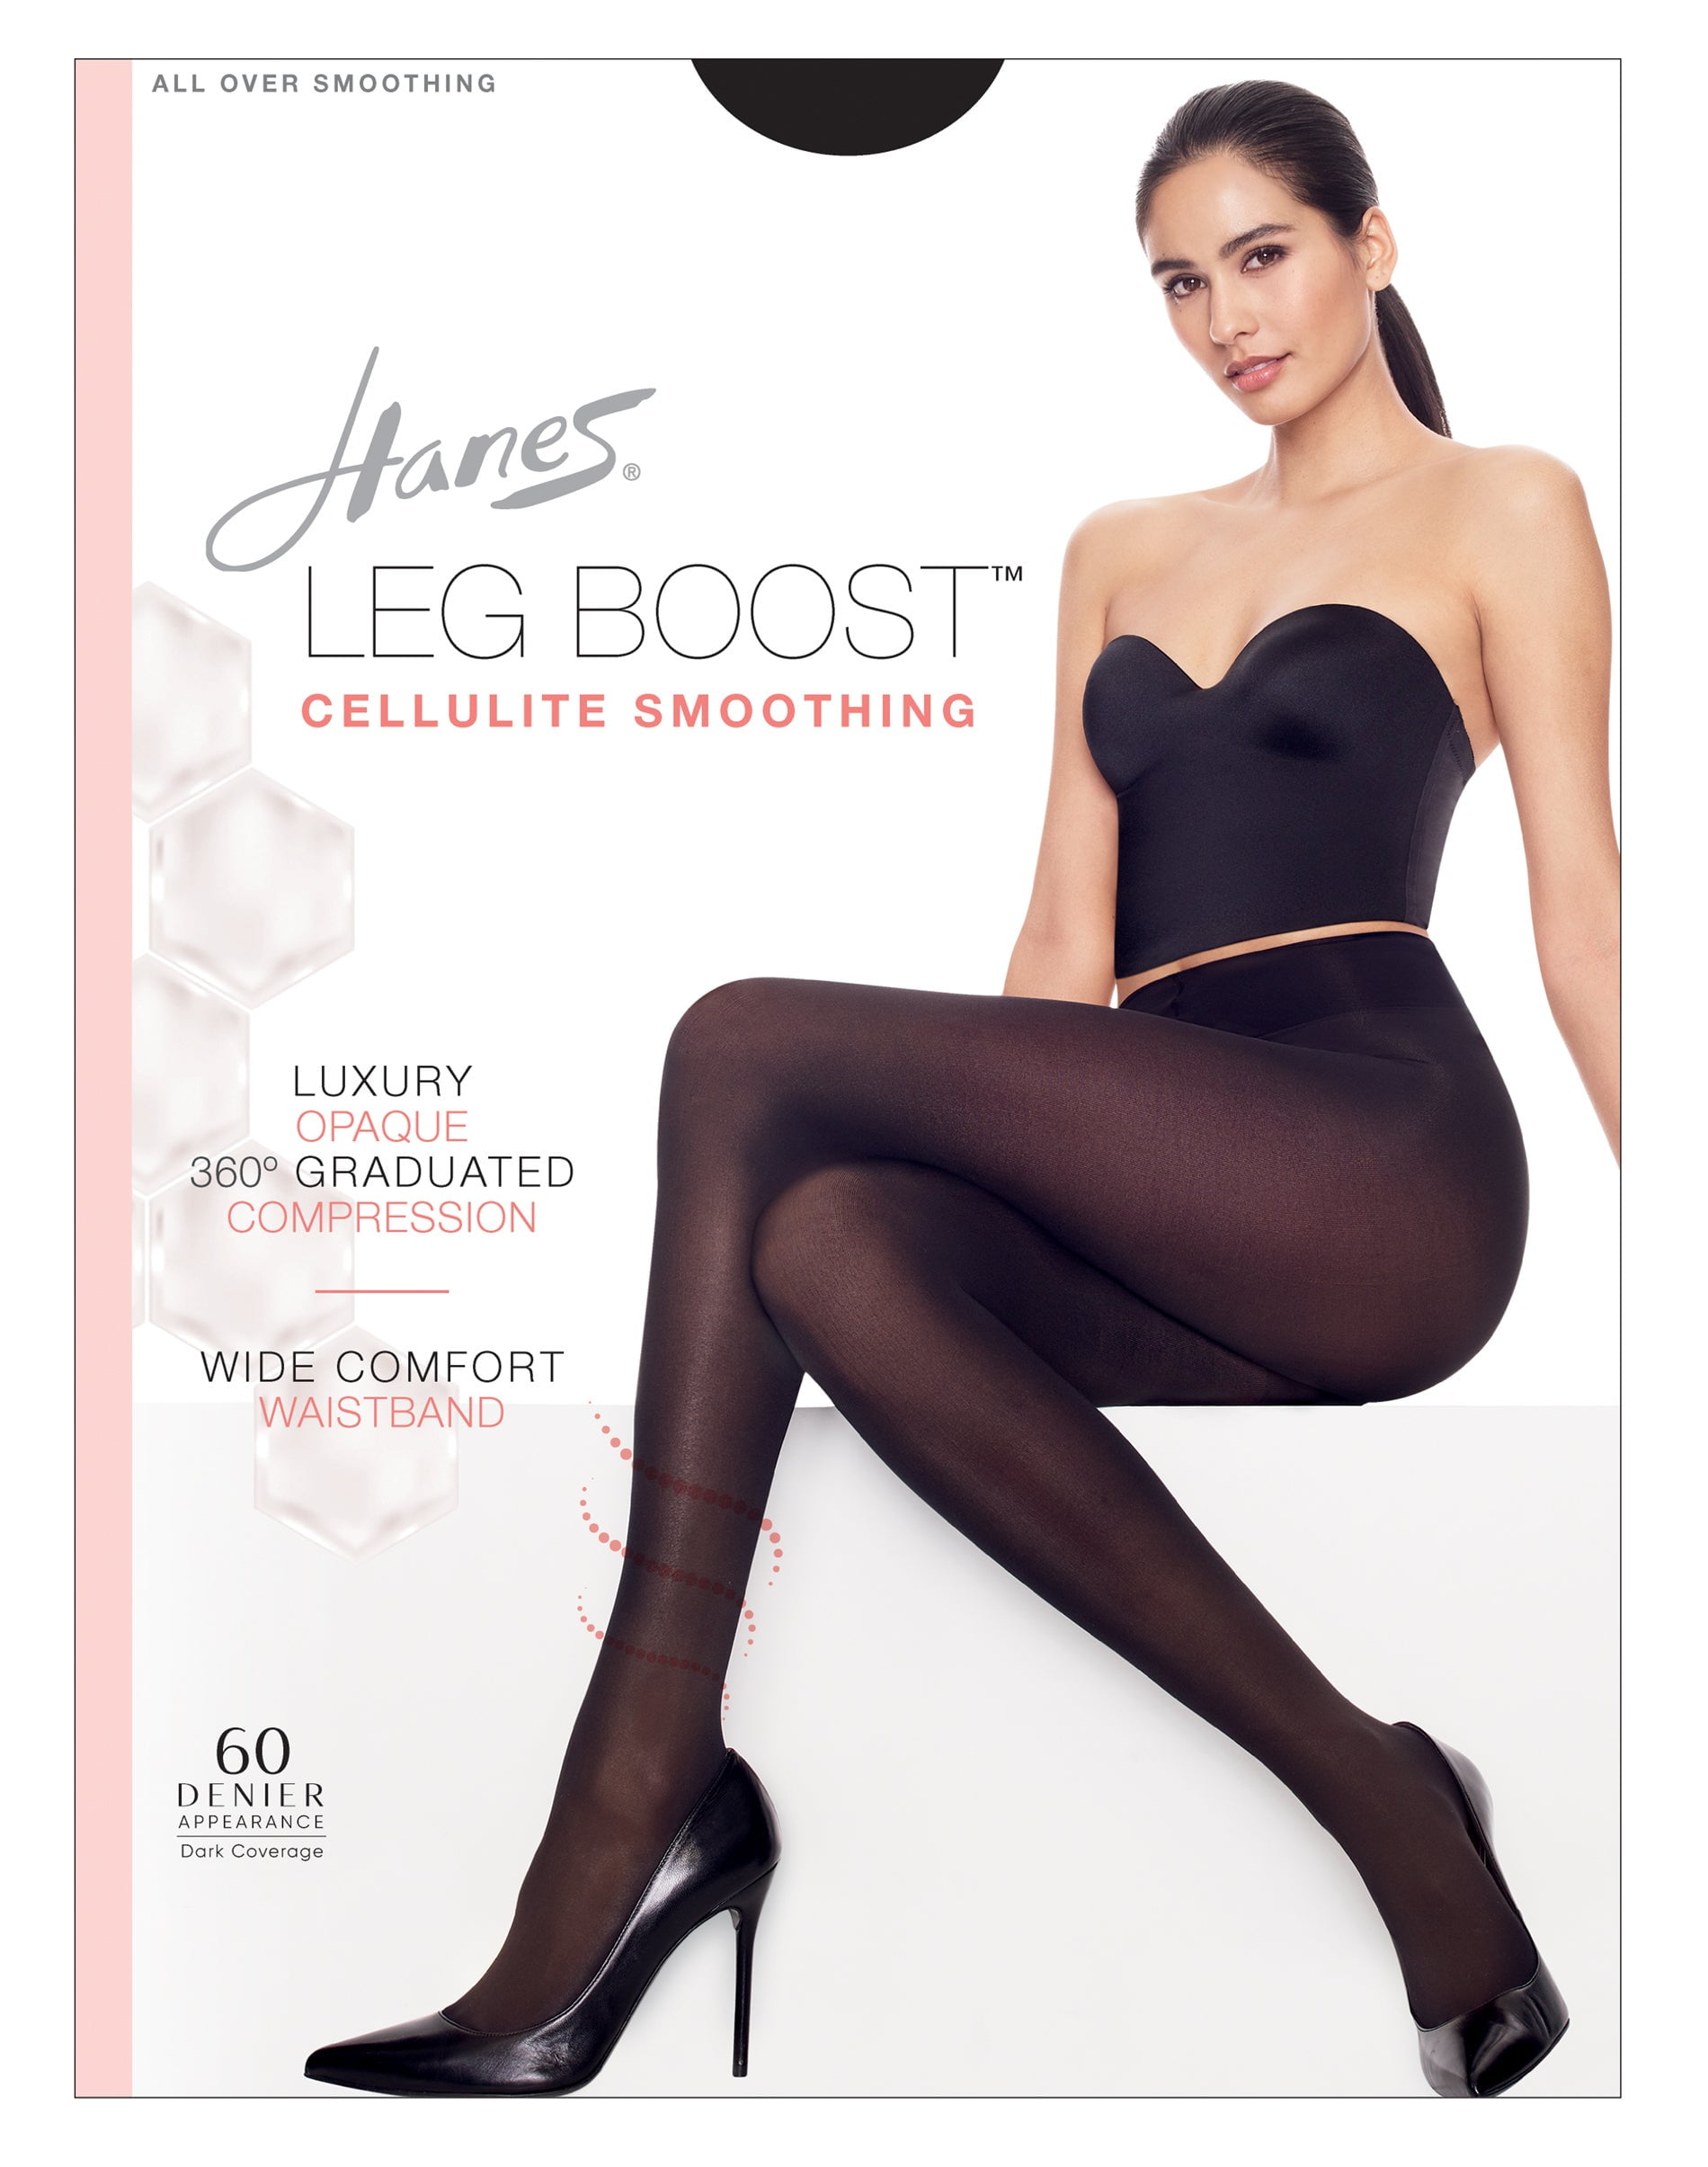 Hanes Leg Boost Cellulite Smoothing Opaque Tights Jet CD Women's 